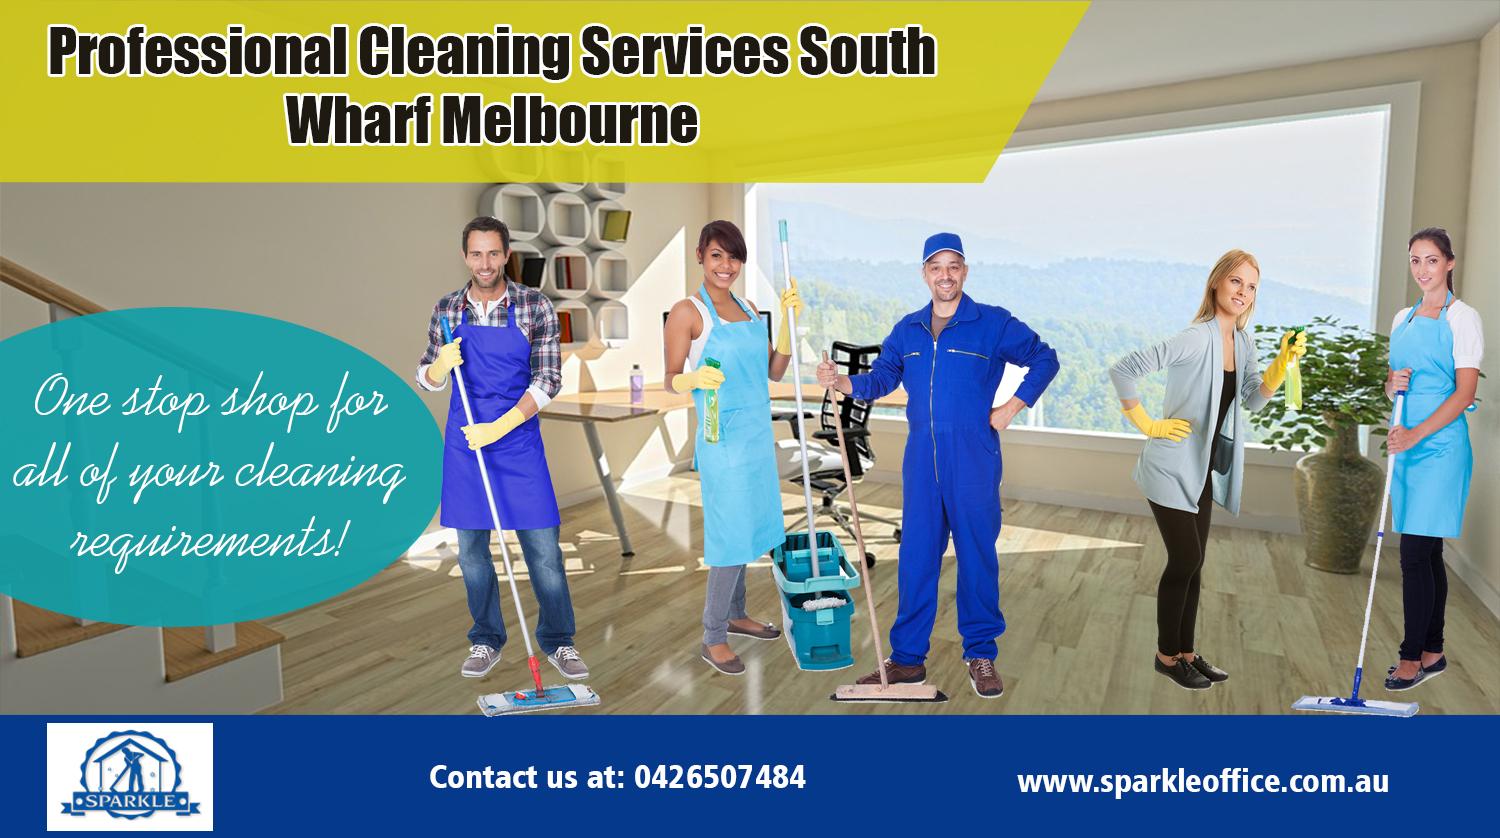 Professional Cleaning Services South Wharf Melbourne